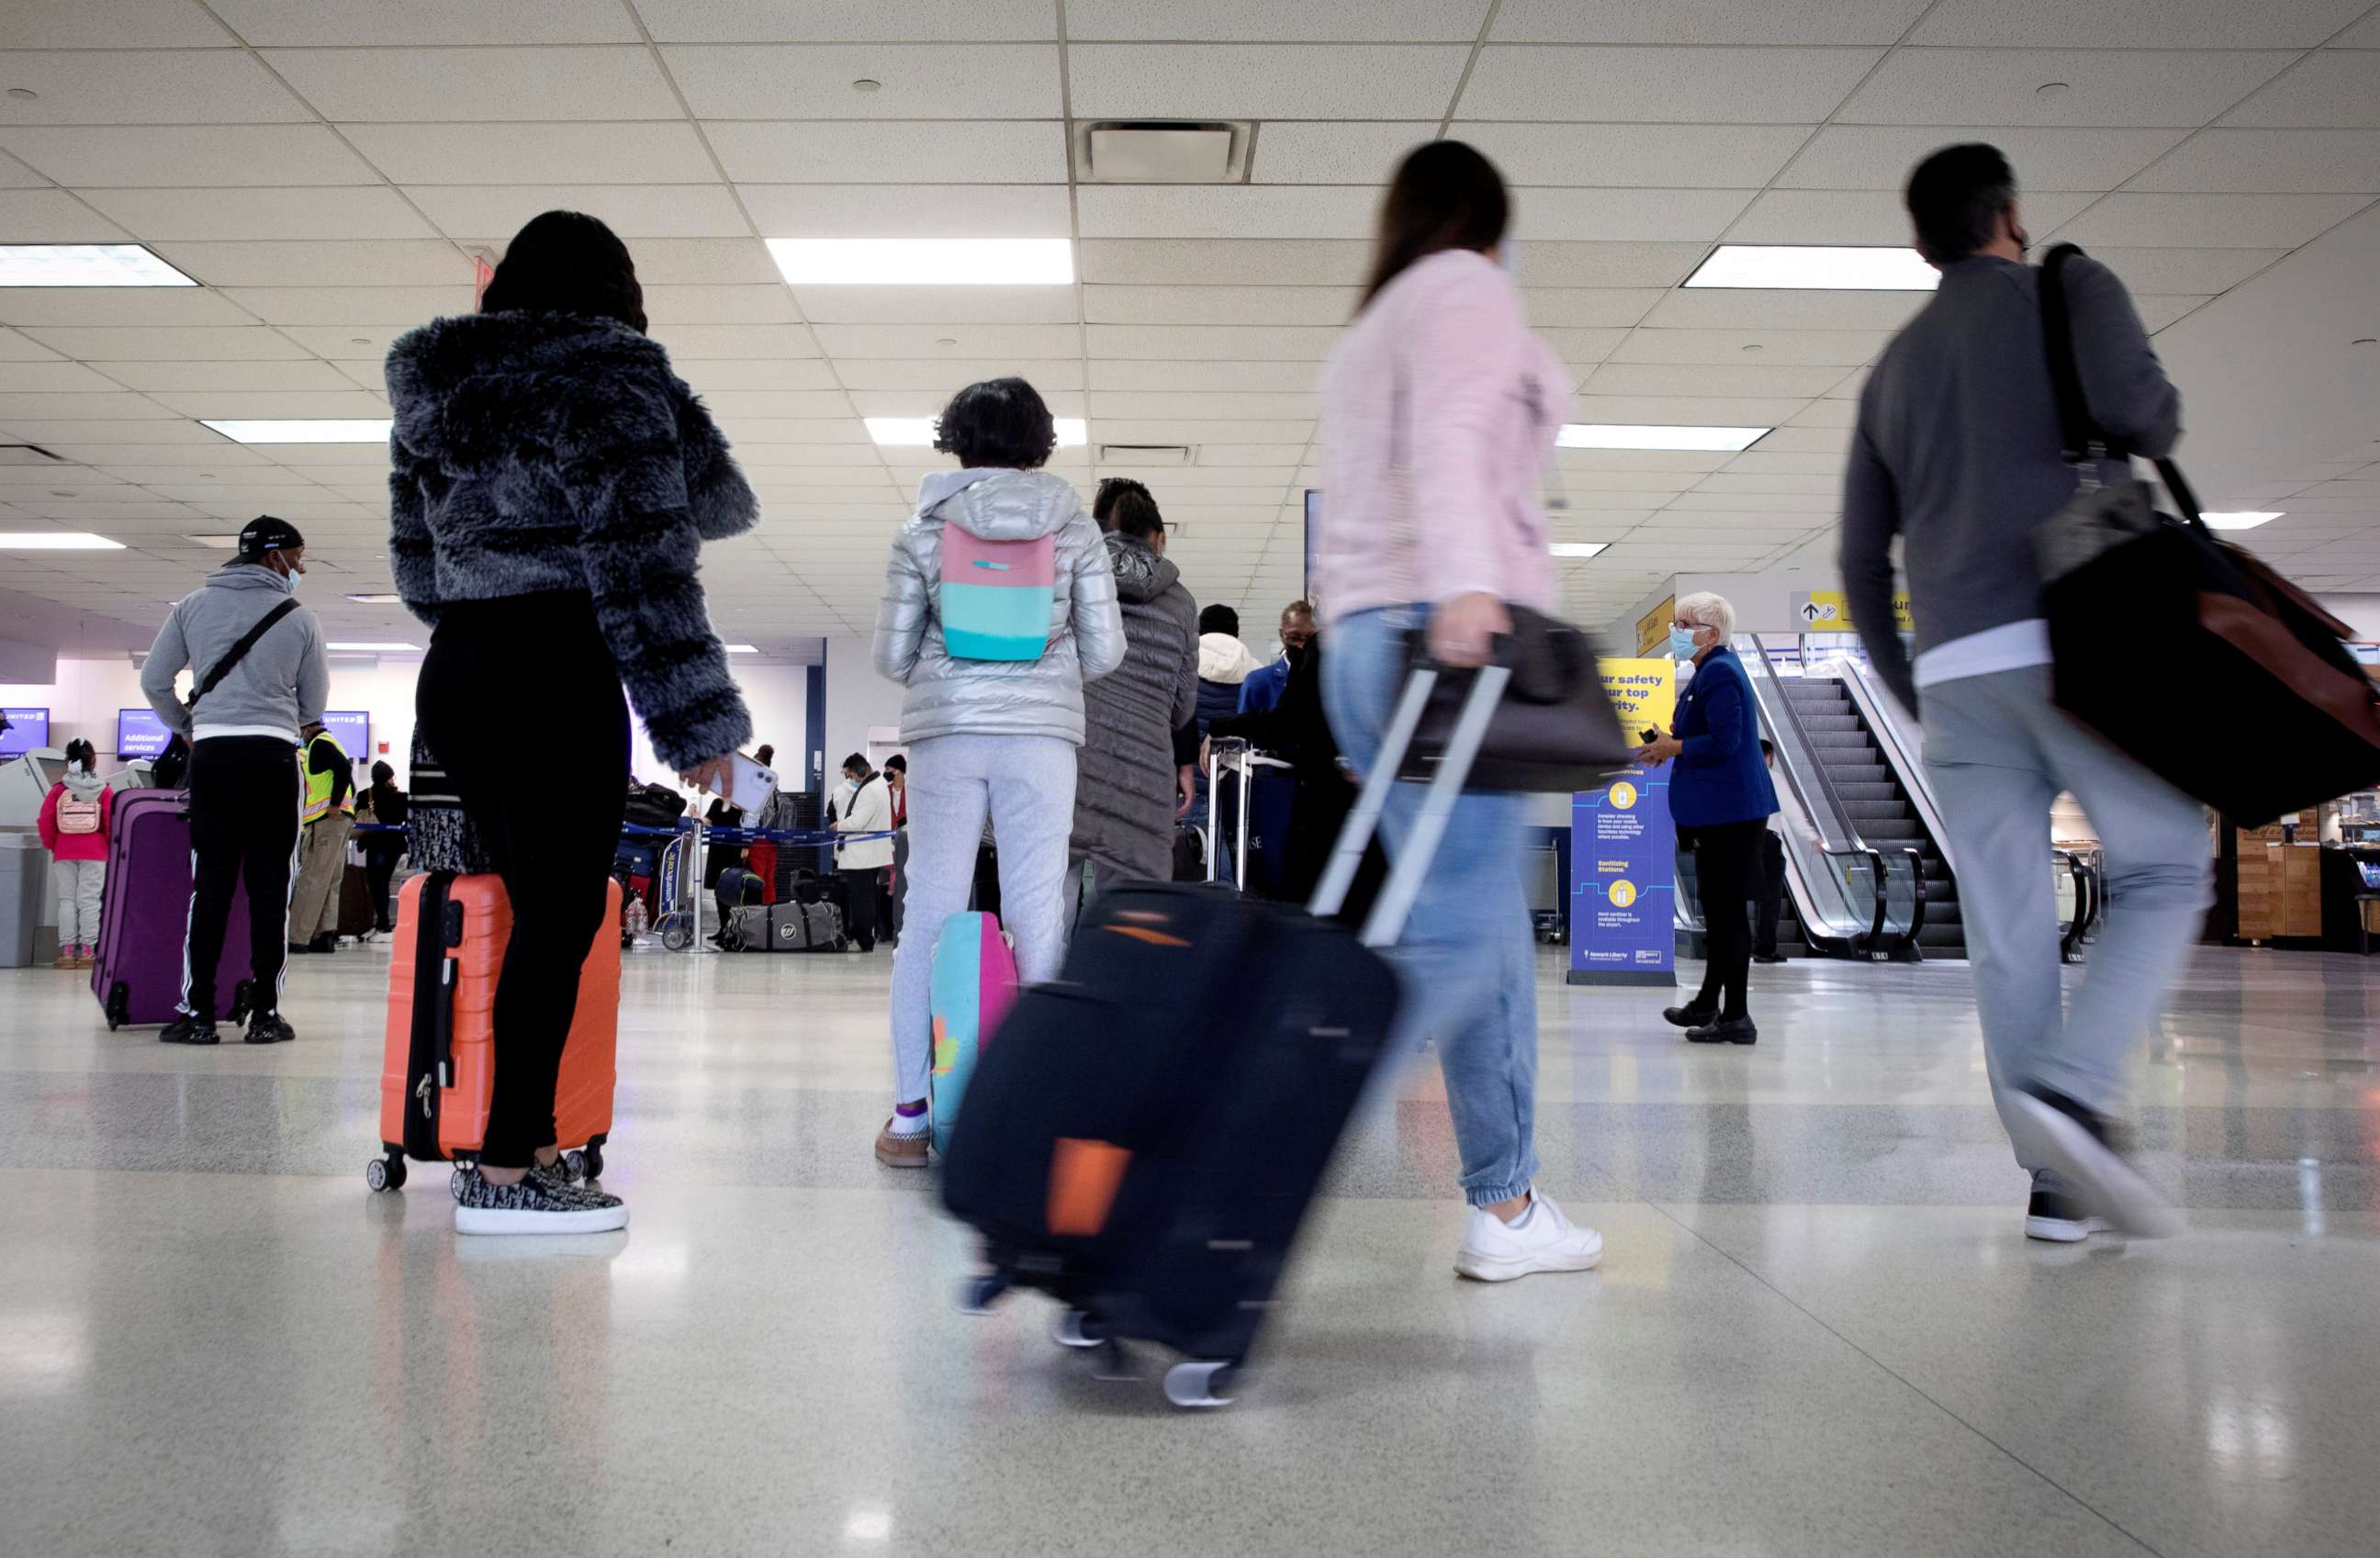 PHOTO: Travelers arrive to check in for flights ahead of the Thanksgiving holiday at Newark International Airport in Newark, N.J., Nov. 25, 2020.